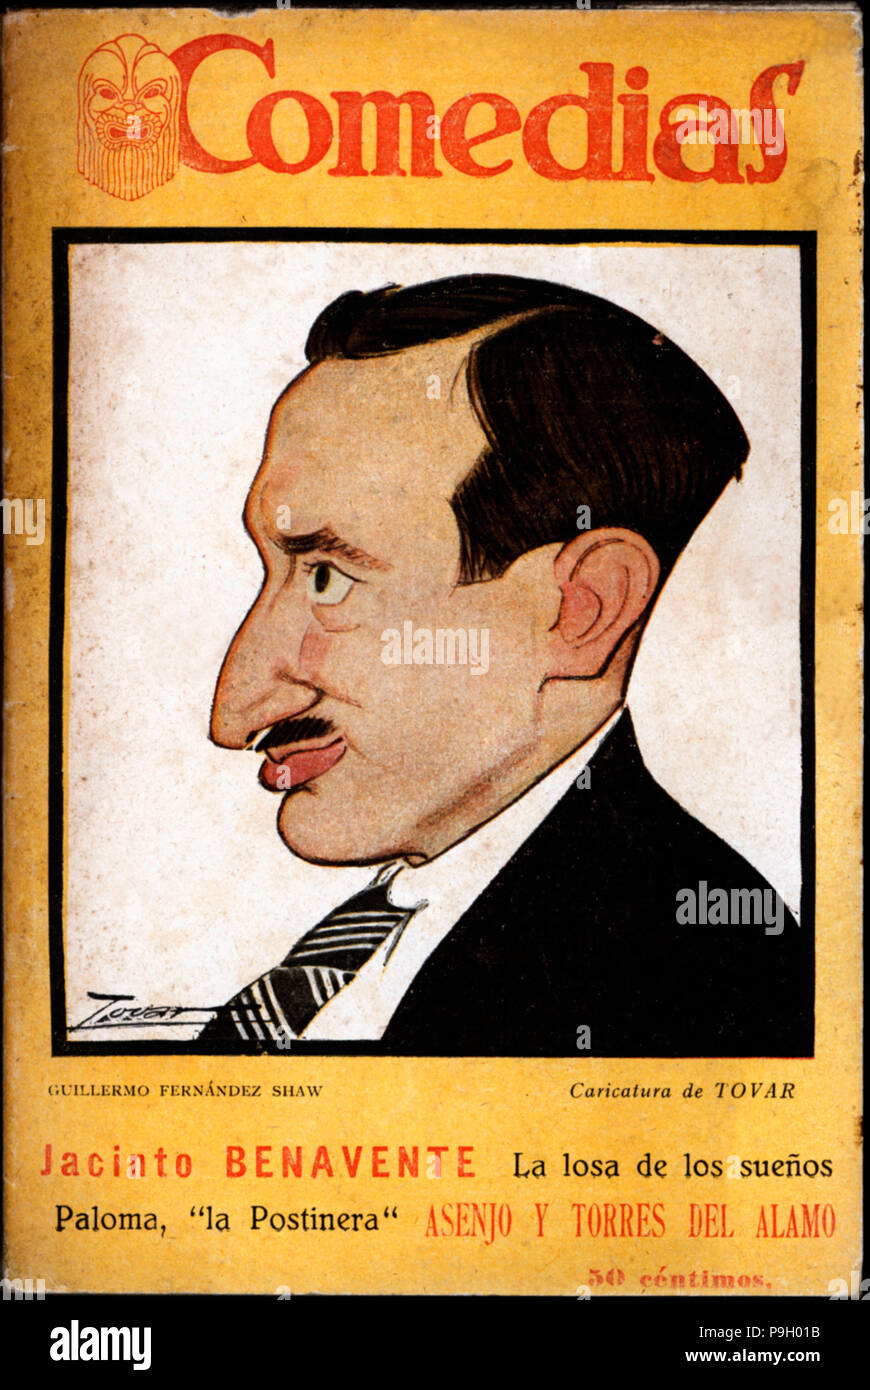 Cover of the publication 'Comedias'. Caricature of Guillermo Fernandez-Shaw Iturralde (1893-1965)… Stock Photo